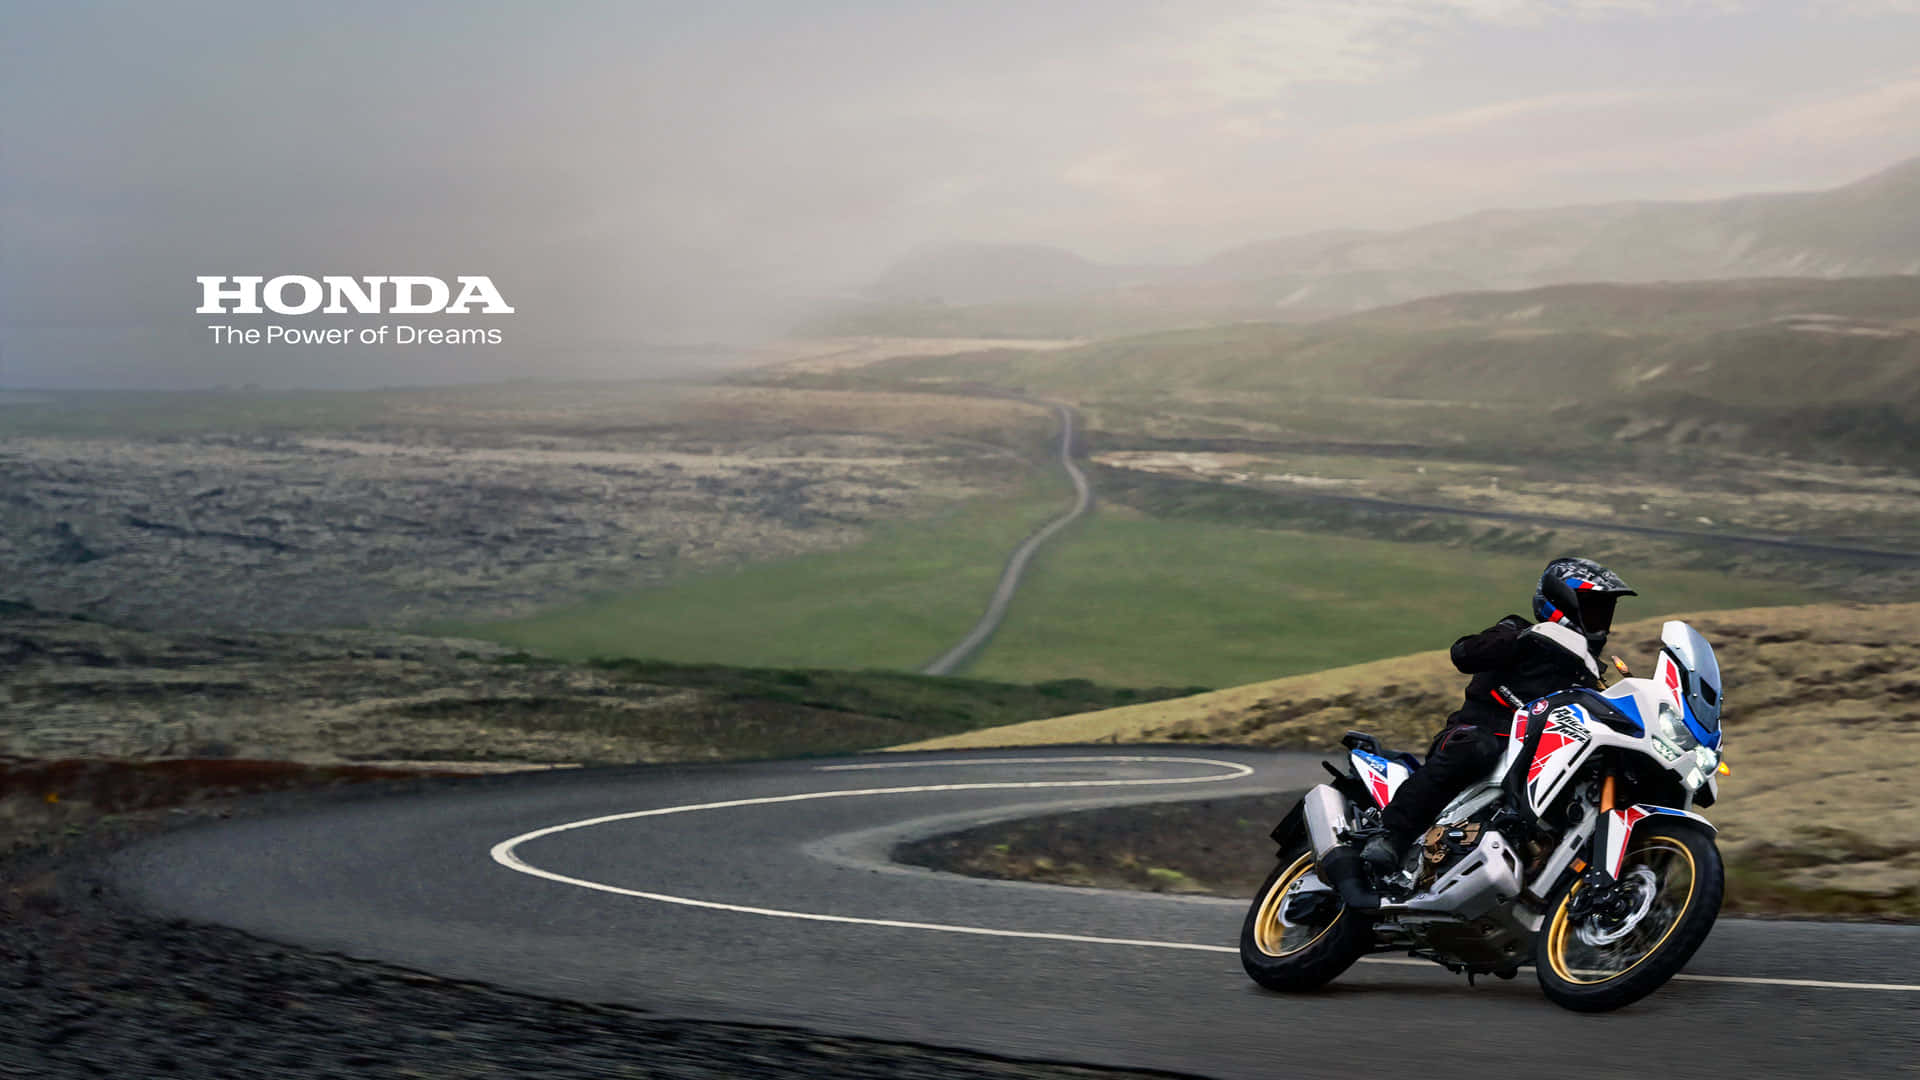 Get behind the wheel of Honda and take life in a new direction